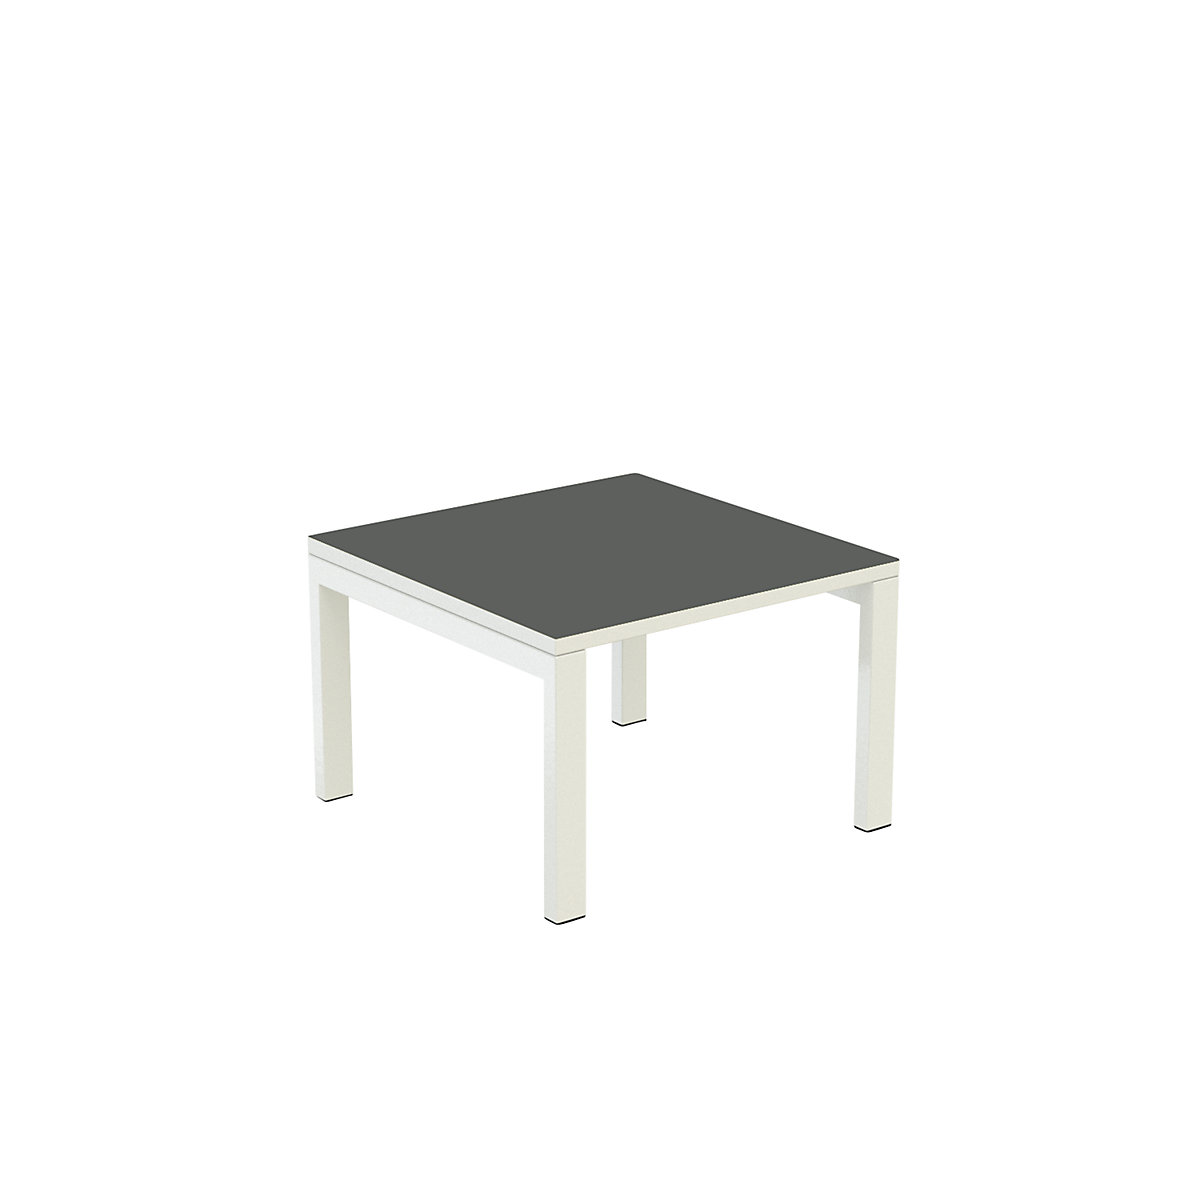 easyDesk® side table – Paperflow, HxWxD 400 x 600 x 600 mm, charcoal-6